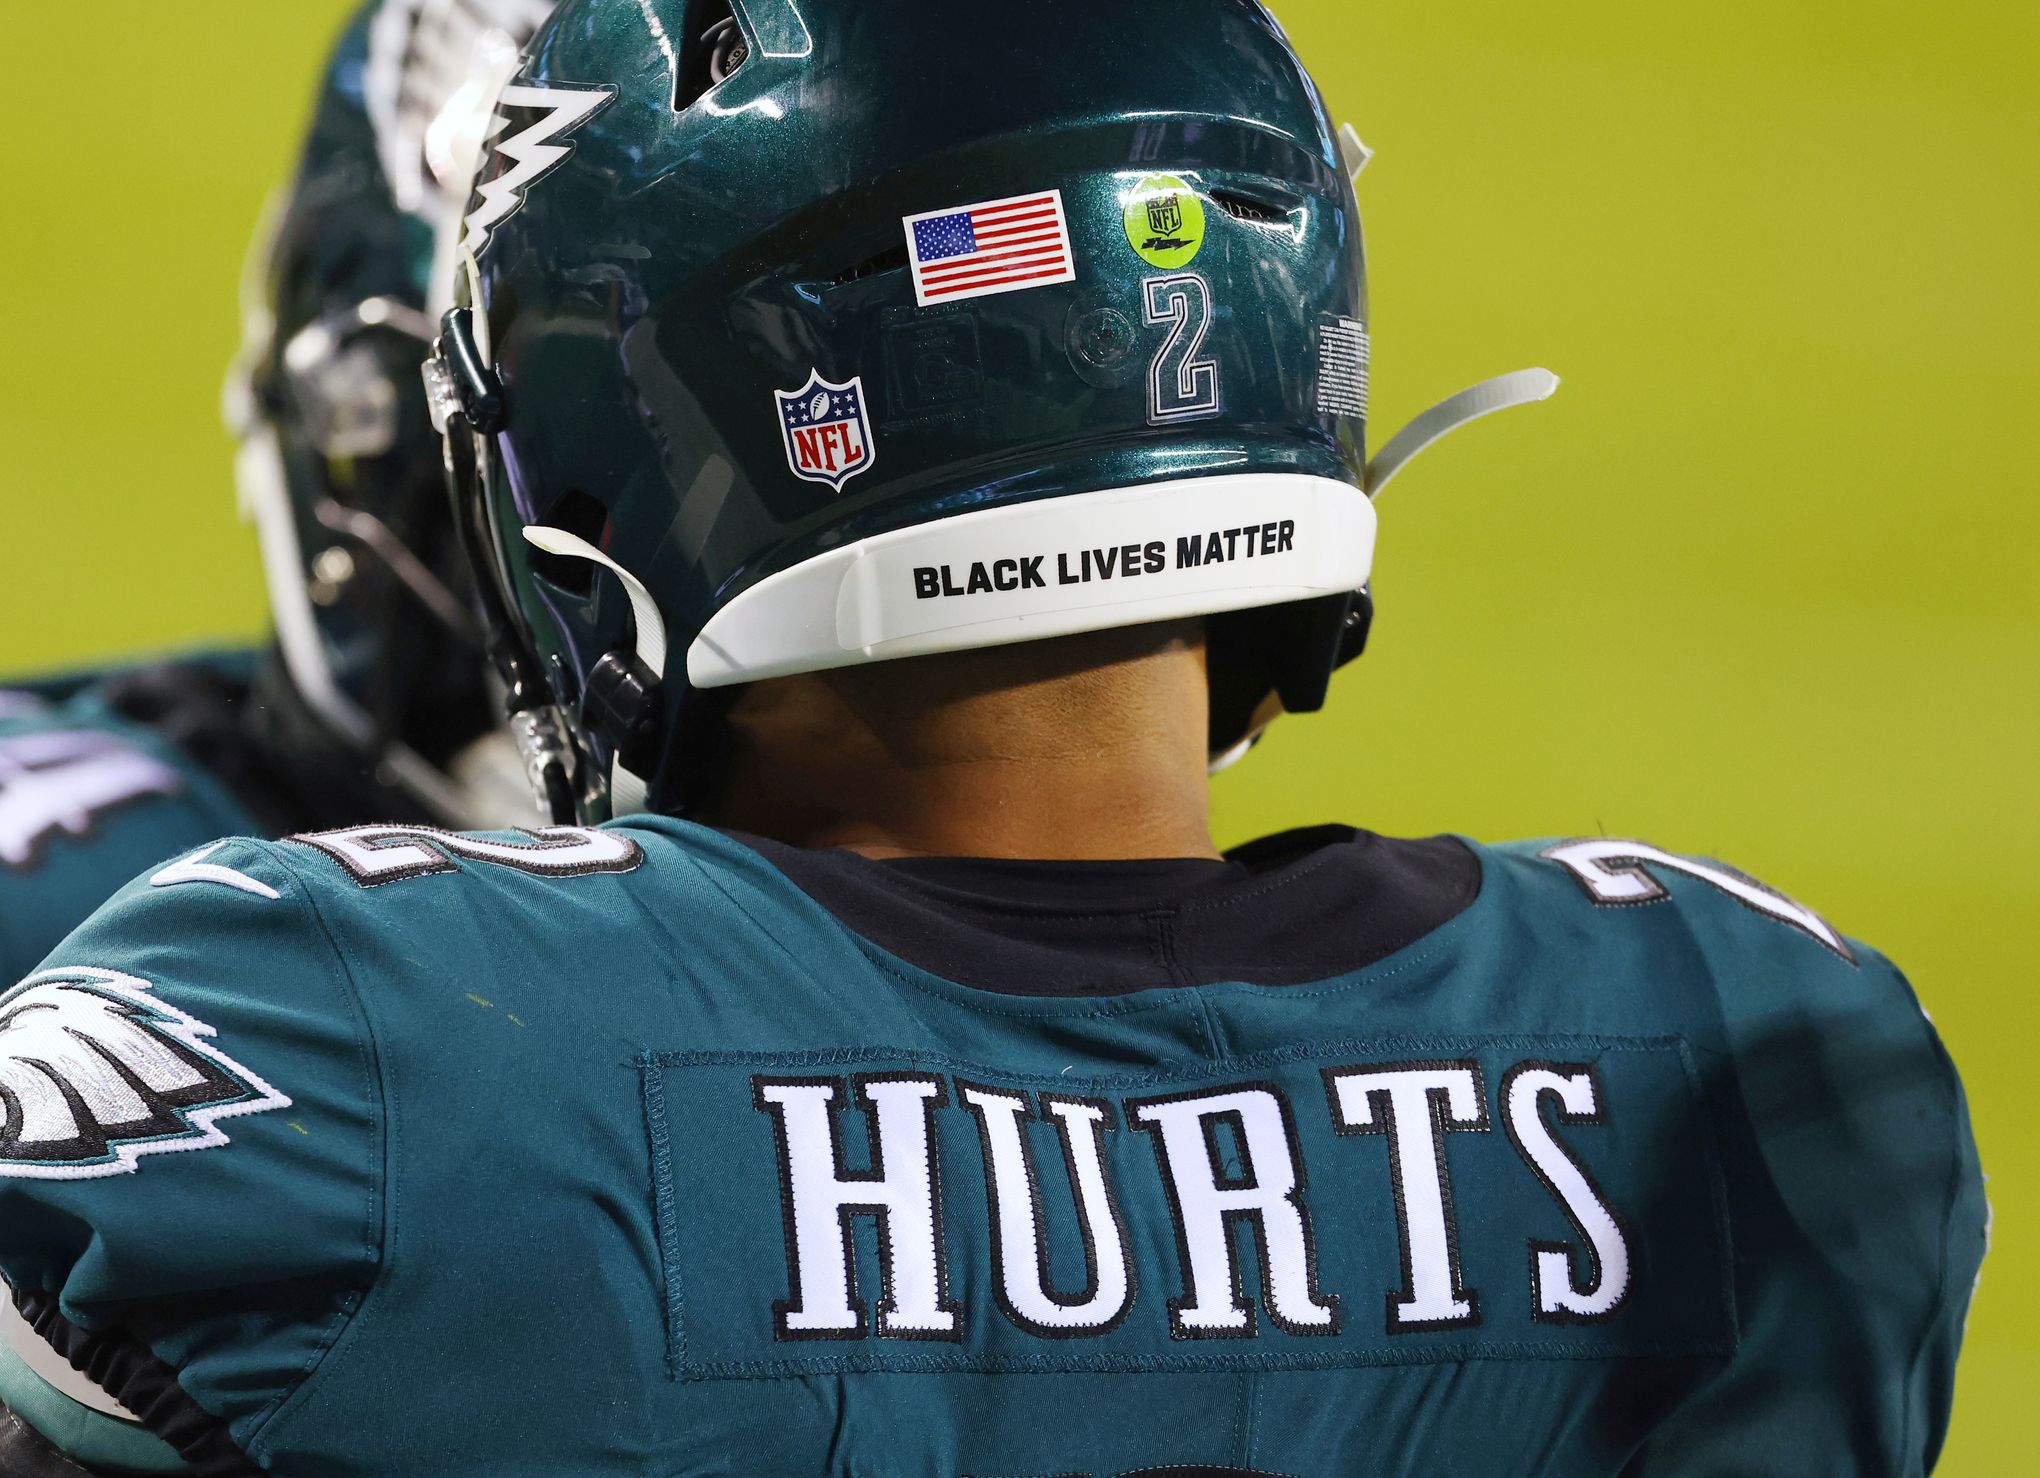 Twitter reacts to the Philadelphia Eagles' unveiling all-black helmets